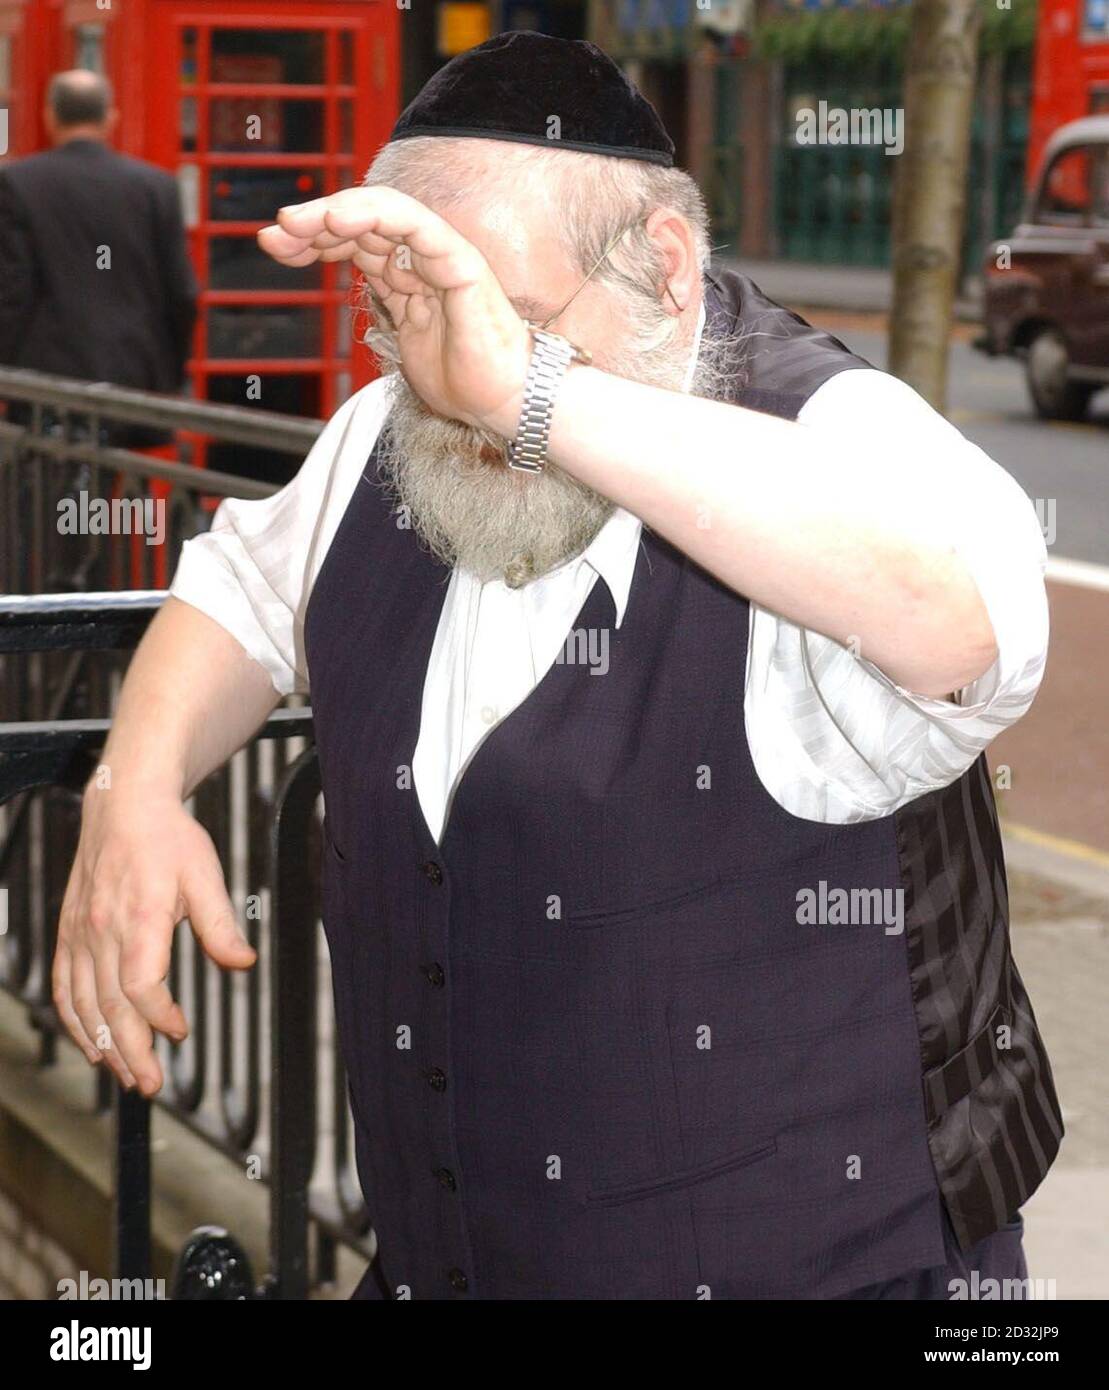 Nachman Reich, of  Reich's Caterers in Golders Green,  leaves the Employment Tribunal Court in Woburn Place, London.  An Arab Muslim was sacked from his job as a cook at a kosher caterers after  throwing food over a rabbi at a Jewish wedding.   *  an employment tribunal heard. Stock Photo